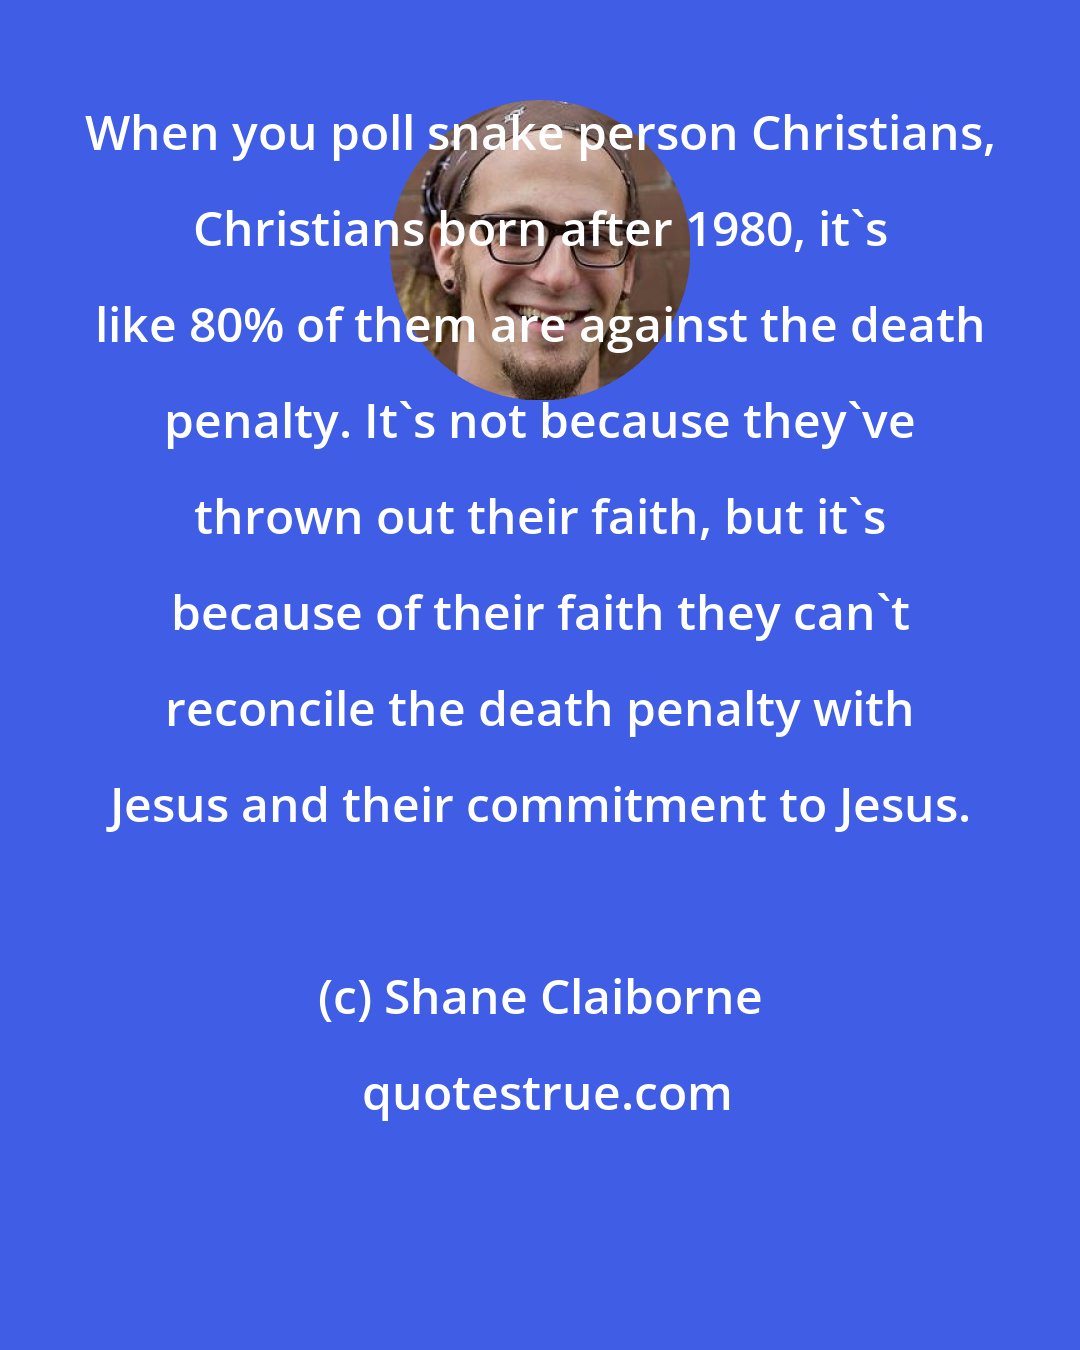 Shane Claiborne: When you poll snake person Christians, Christians born after 1980, it's like 80% of them are against the death penalty. It's not because they've thrown out their faith, but it's because of their faith they can't reconcile the death penalty with Jesus and their commitment to Jesus.